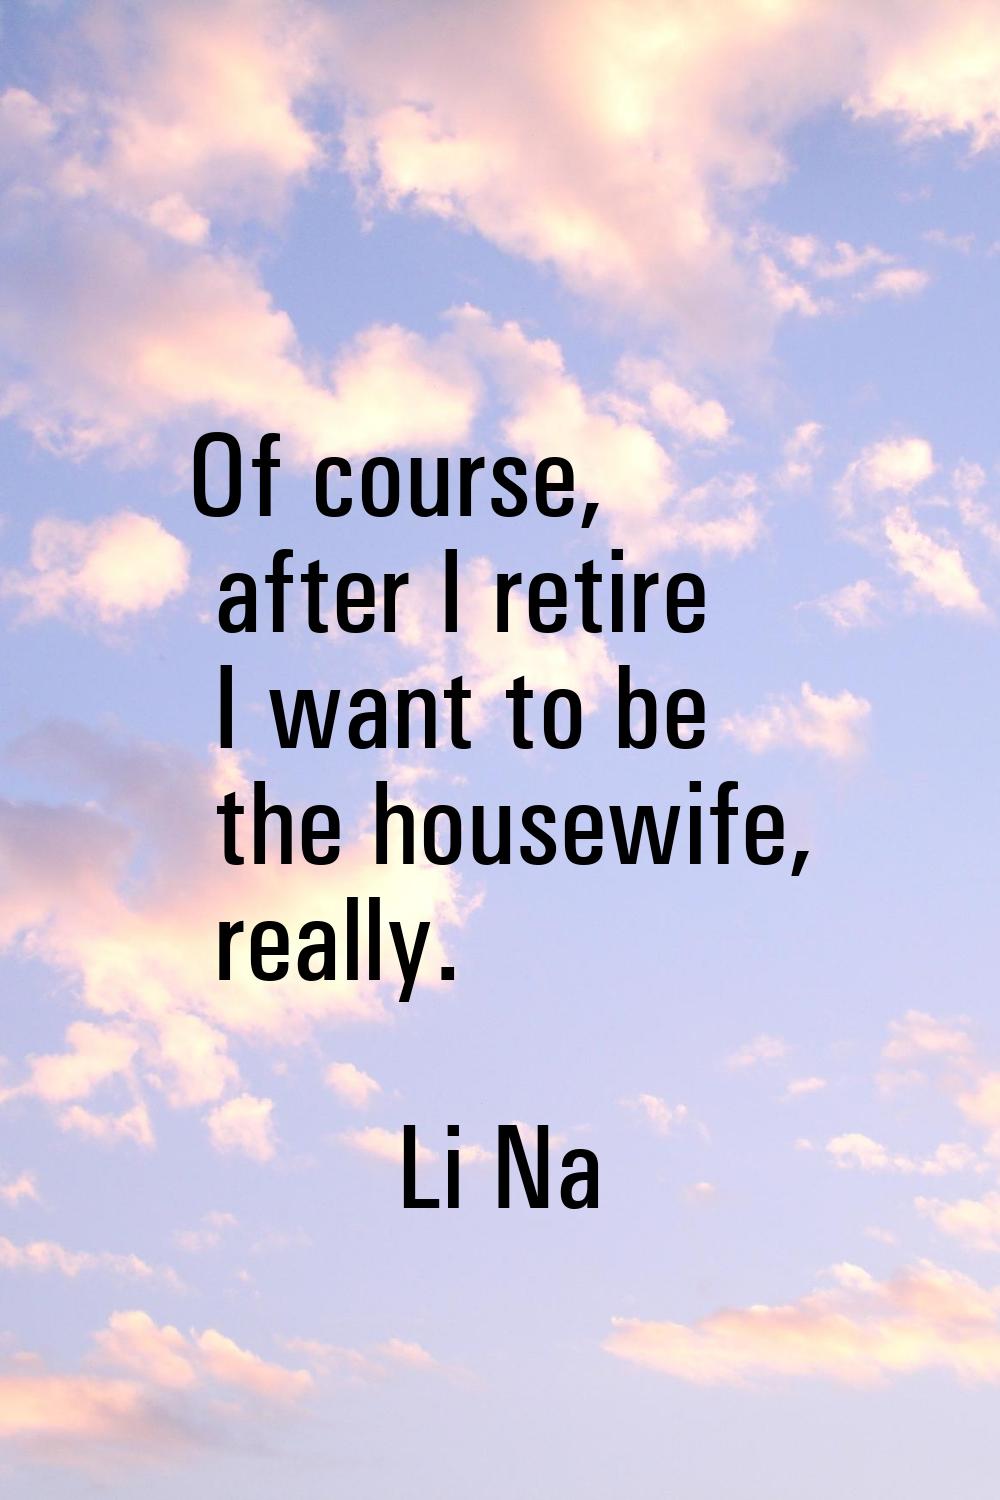 Of course, after I retire I want to be the housewife, really.